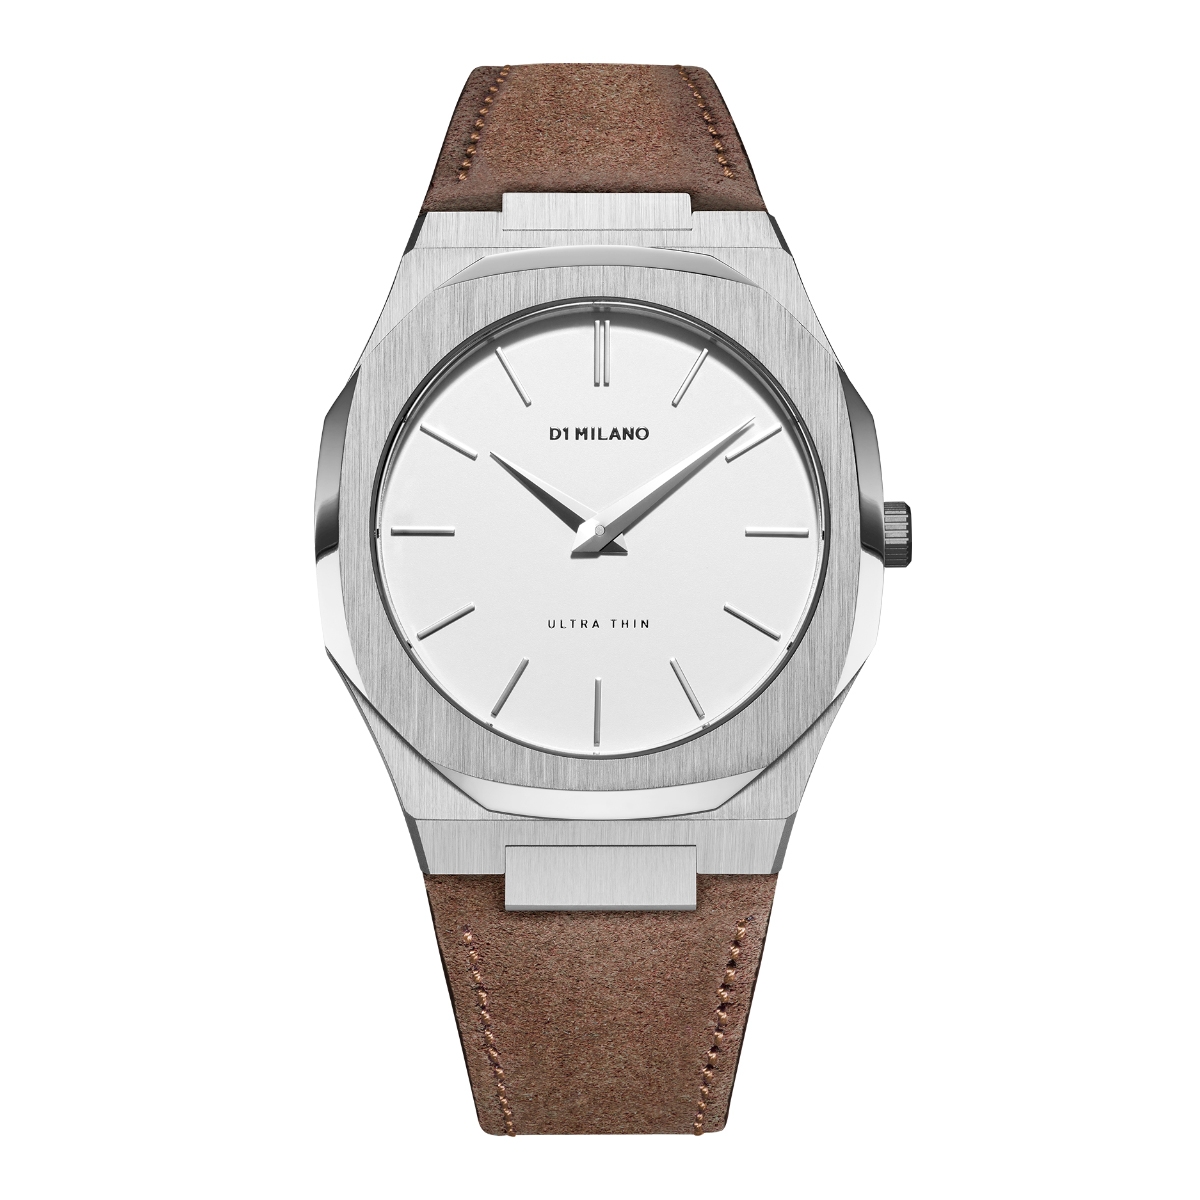 D1 MILANO ディーワンミラノ Ultra Thin Eggshel Dial with Suede Leather Brown Strap